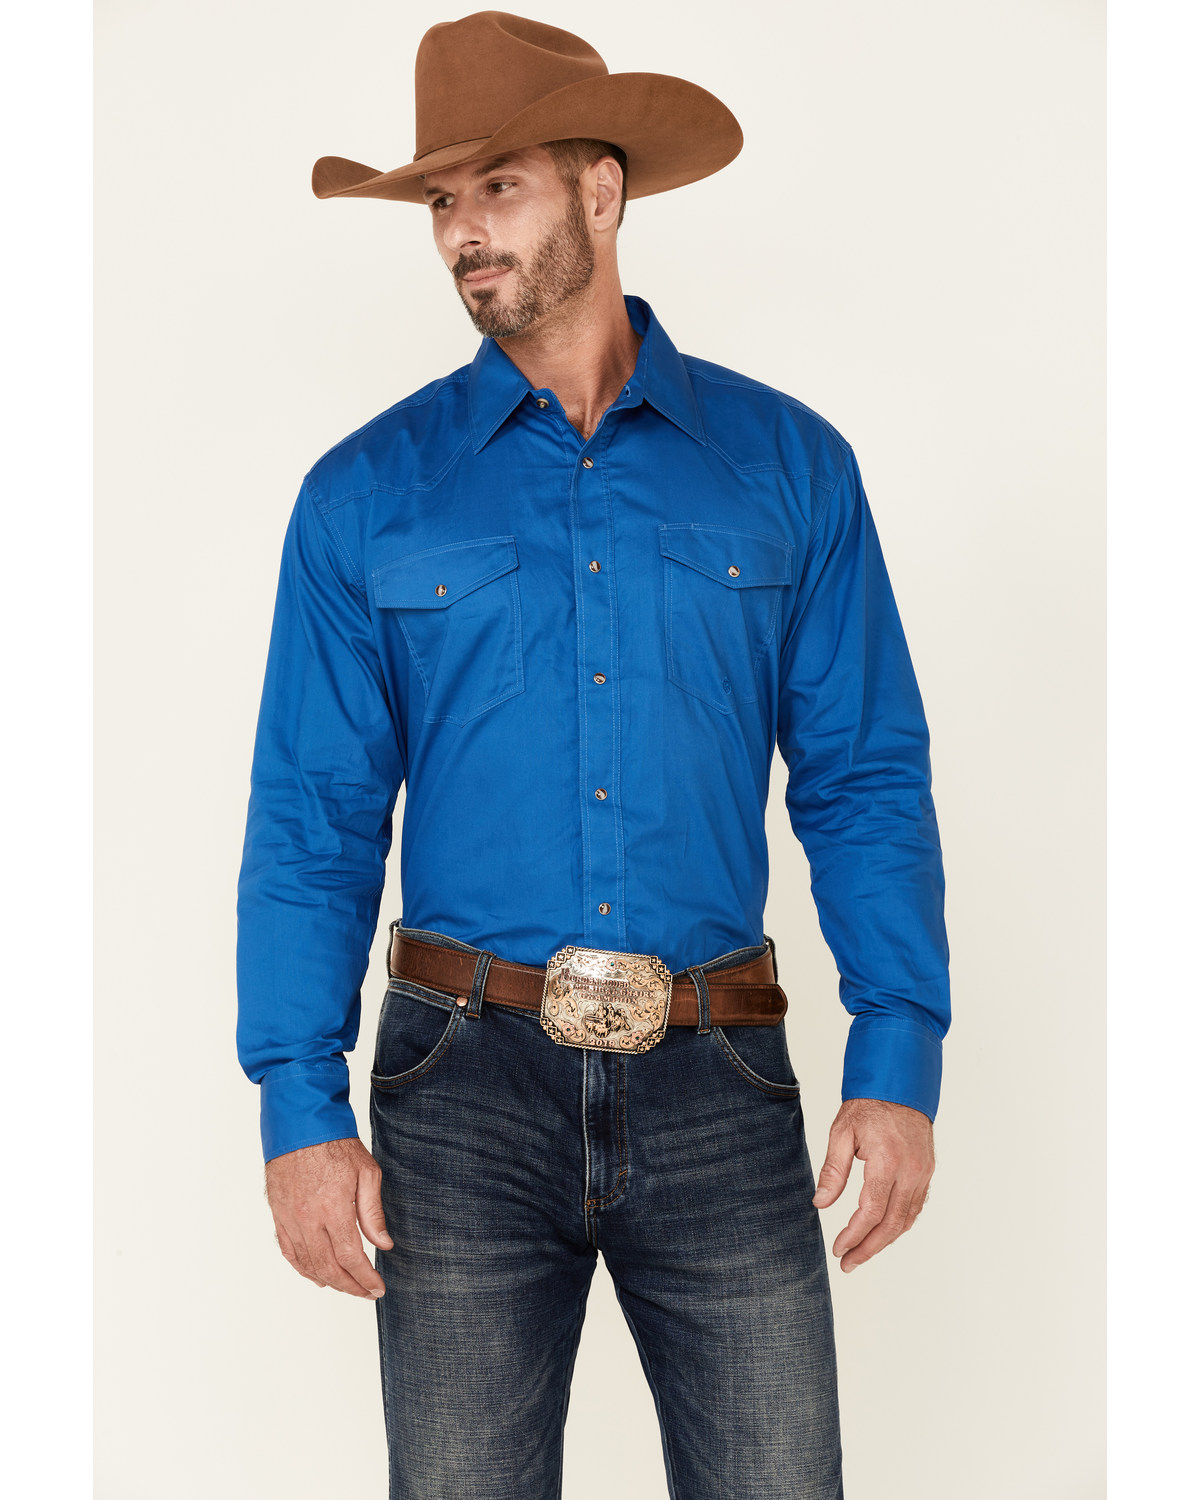 Roper Men's Amarillo Collection Solid Long Sleeve Western Shirt